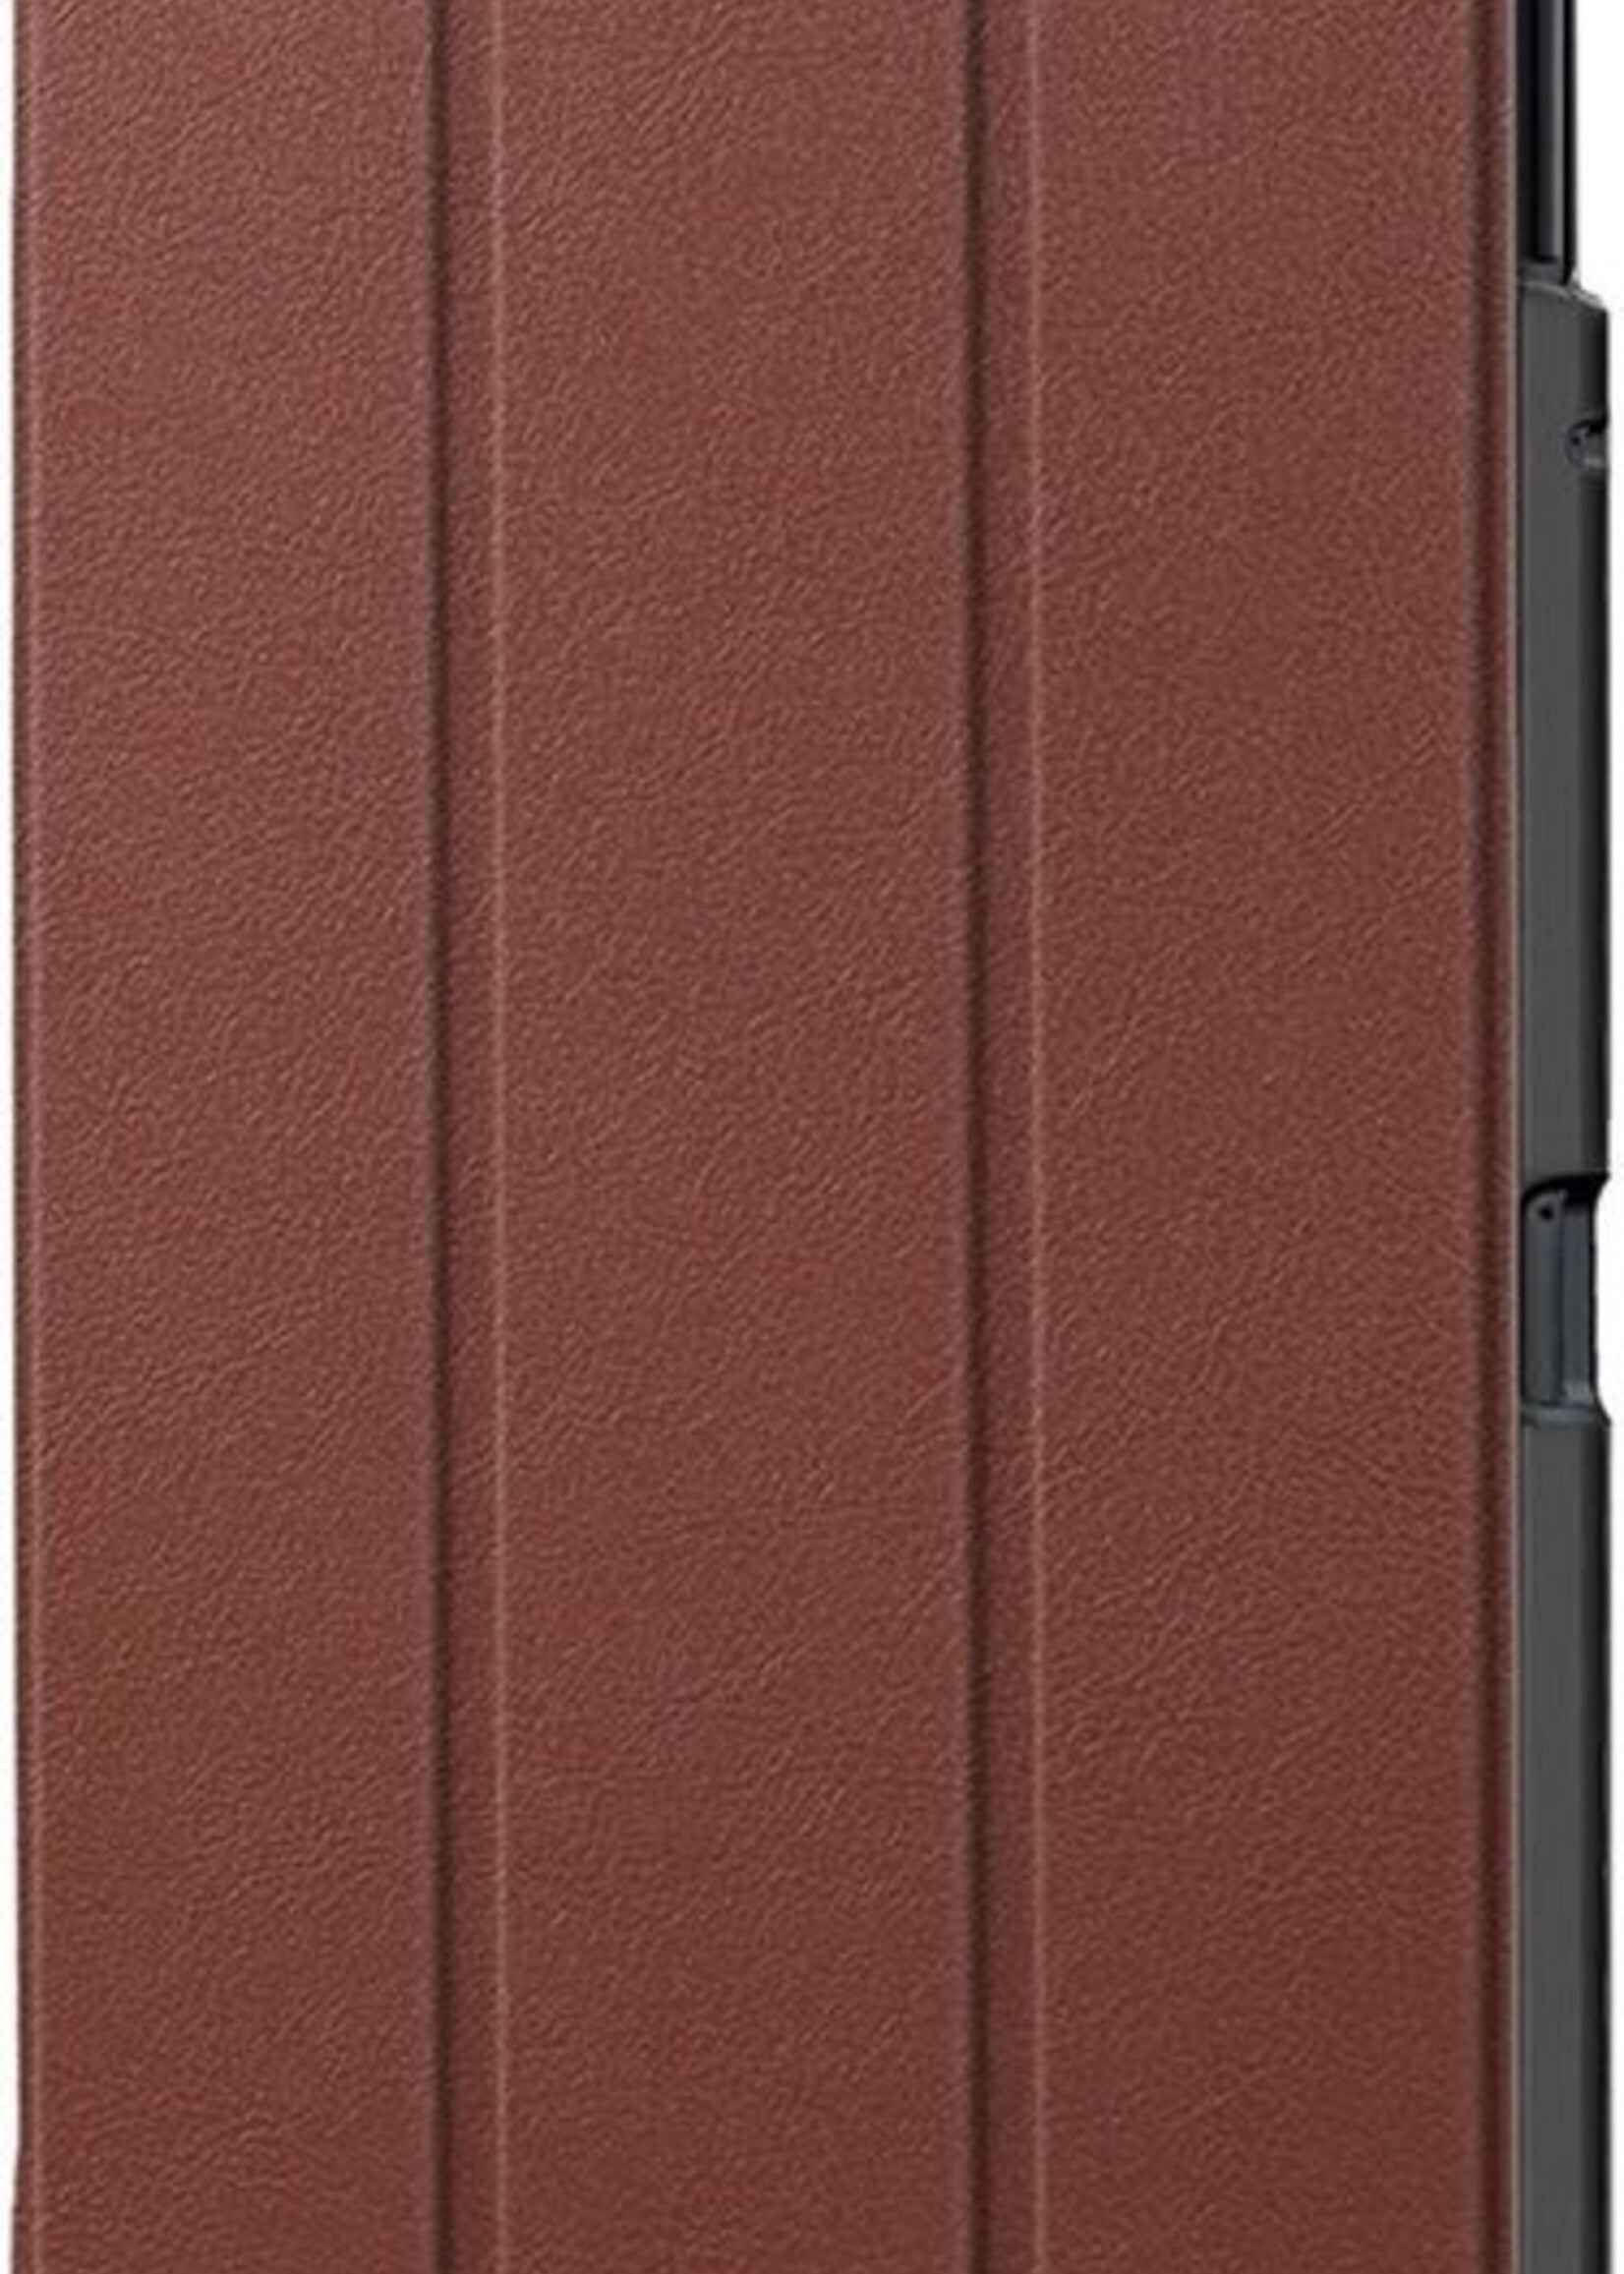 BTH Hoes Geschikt voor Samsung Galaxy Tab A 10.5 2018 Hoes Book Case Hoesje Trifold Cover - Hoesje Geschikt voor Samsung Tab A 10.5 2018 Hoesje Bookcase - Bruin